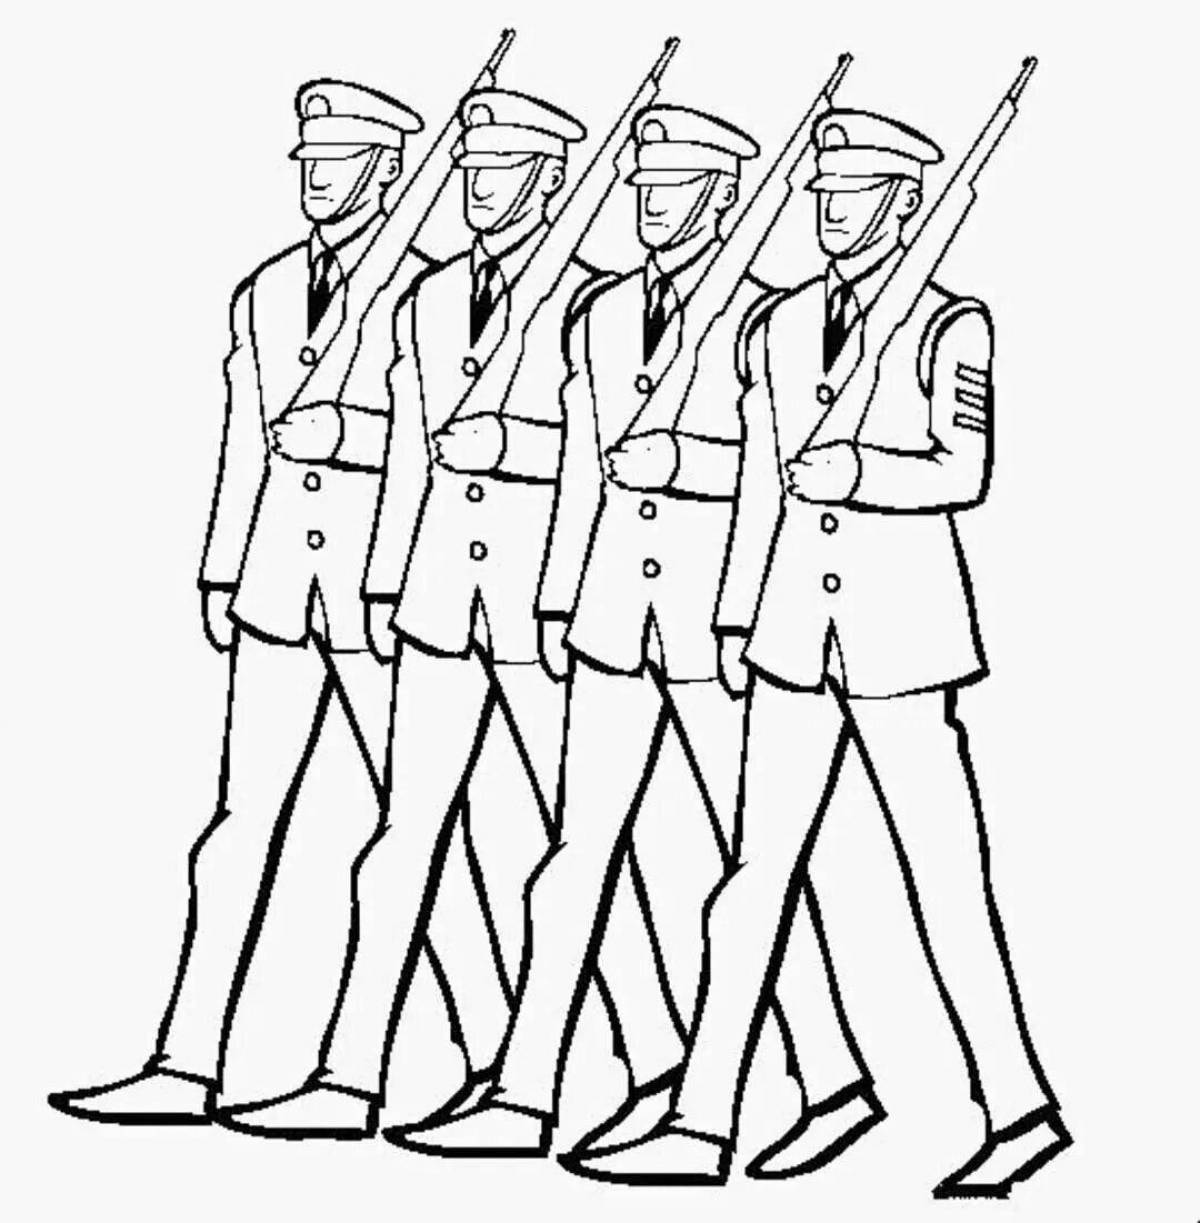 Creative toy soldiers coloring book